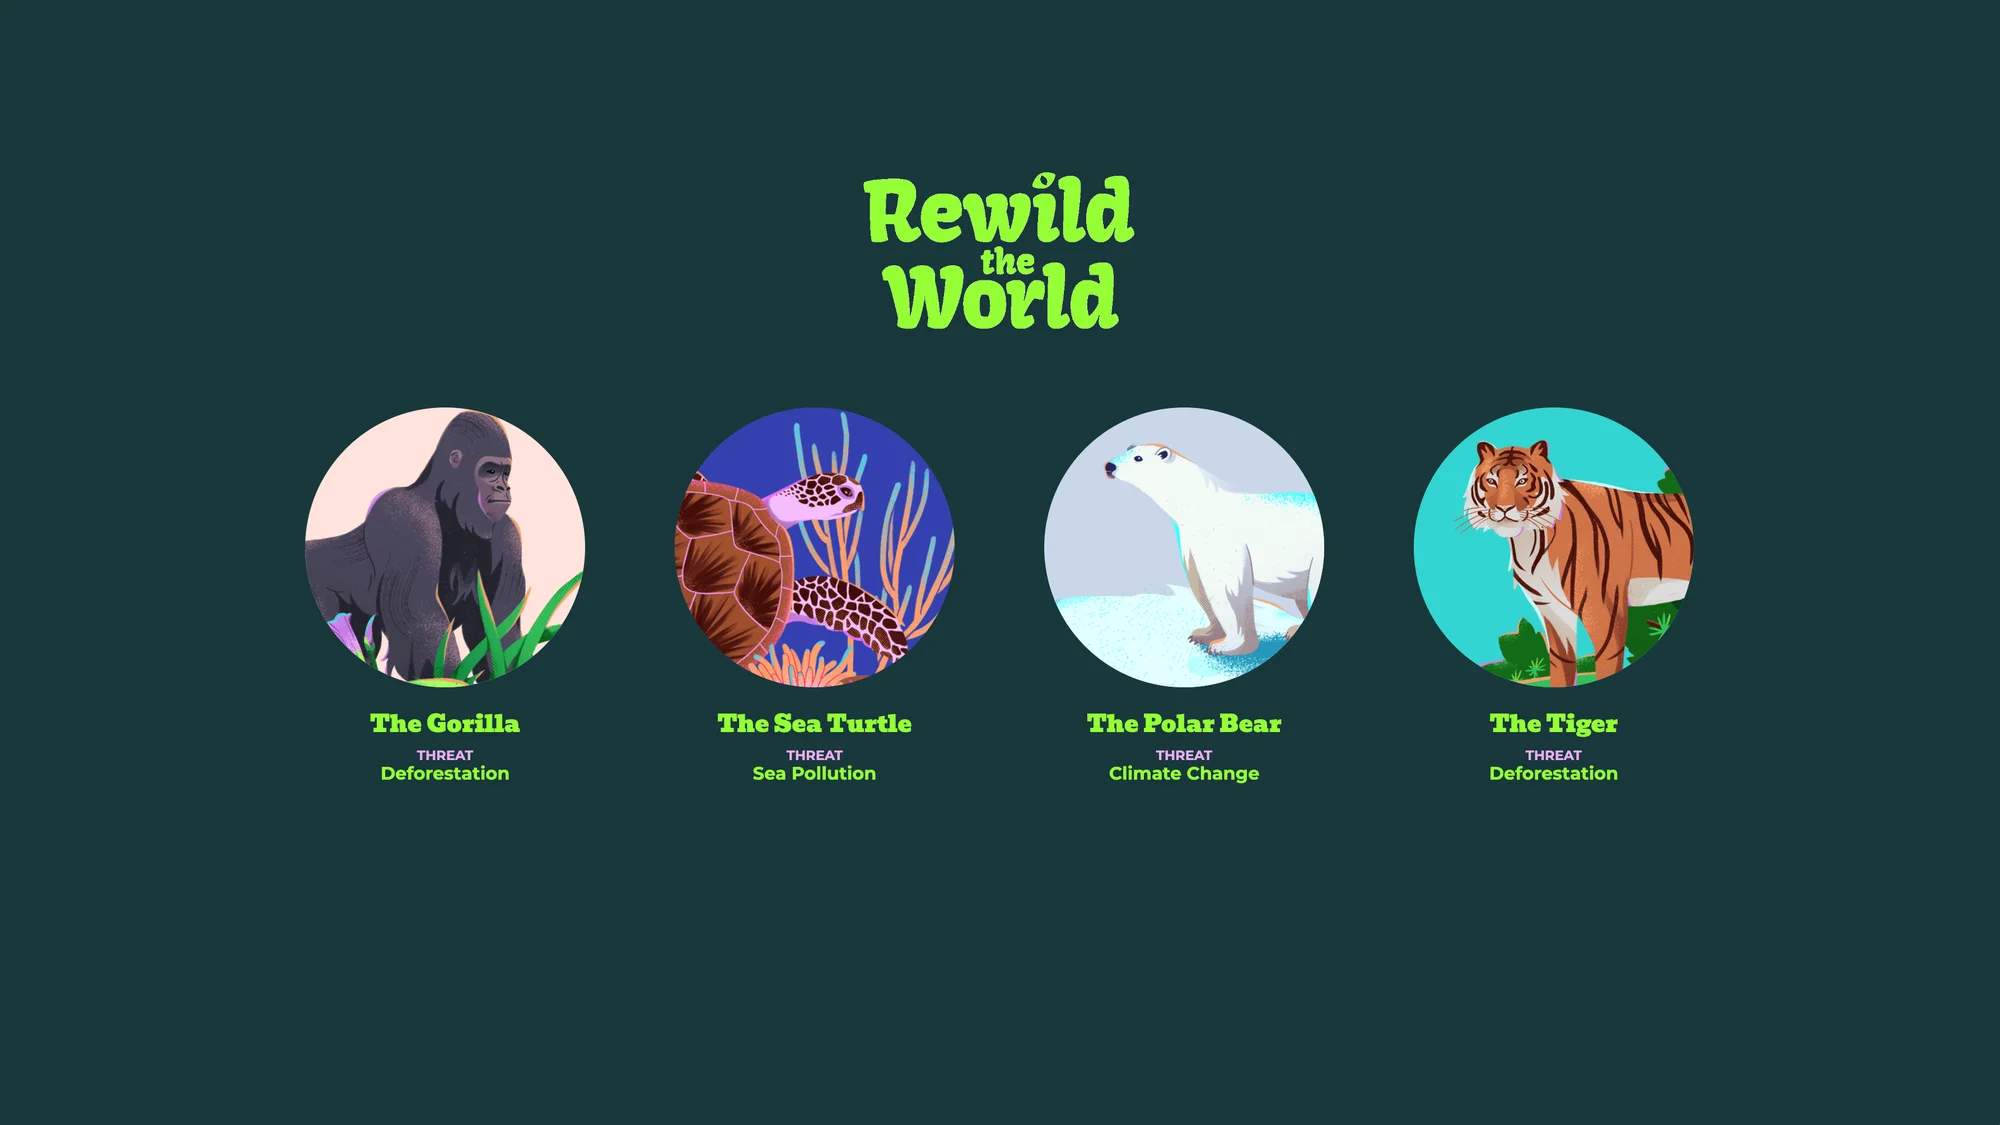 A green landing page showing a choice of four illustrated animals. Choose between The Gorilla - threat deforestation, The Sea Turtle - threat sea pollution, The Polar - Threat climate changeBear and The Tiger - Threat deforestation